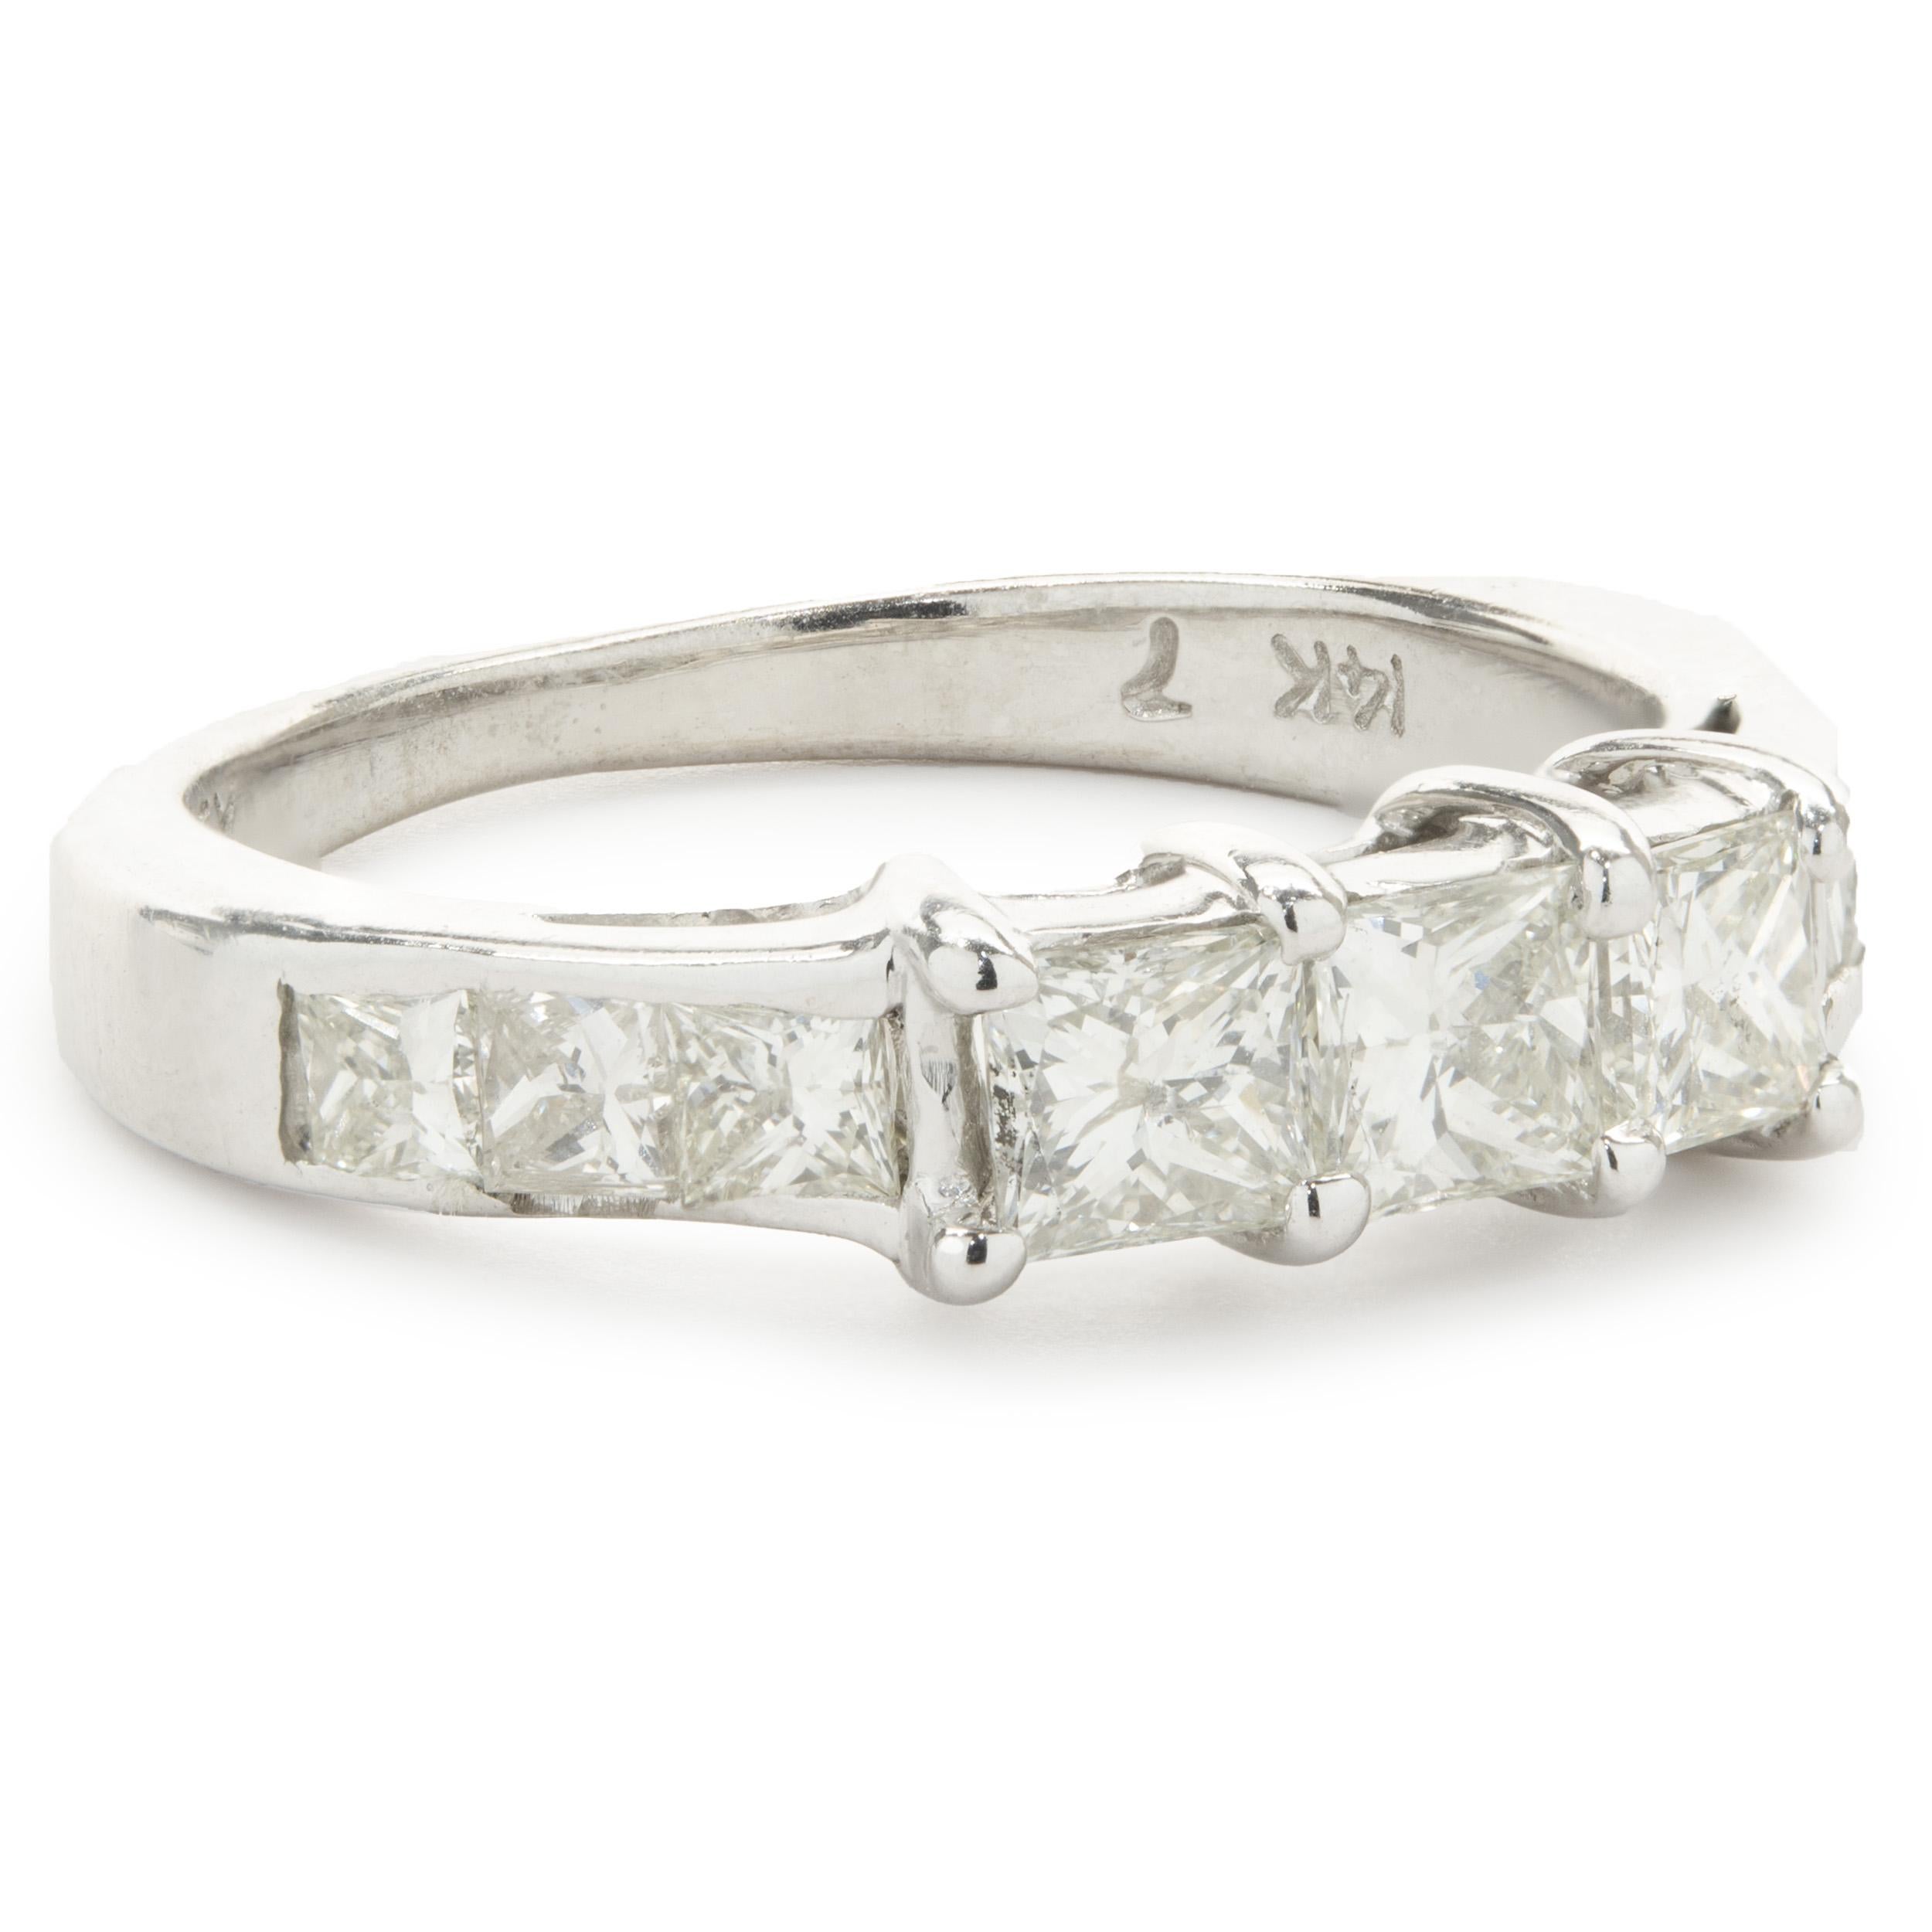 Designer: custom
Material: 14K white gold
Diamond: 9 princess cut = .65cttw
Color: G
Clarity: SI1
Size: 5 complimentary sizing available 
Weight: 3.01 grams